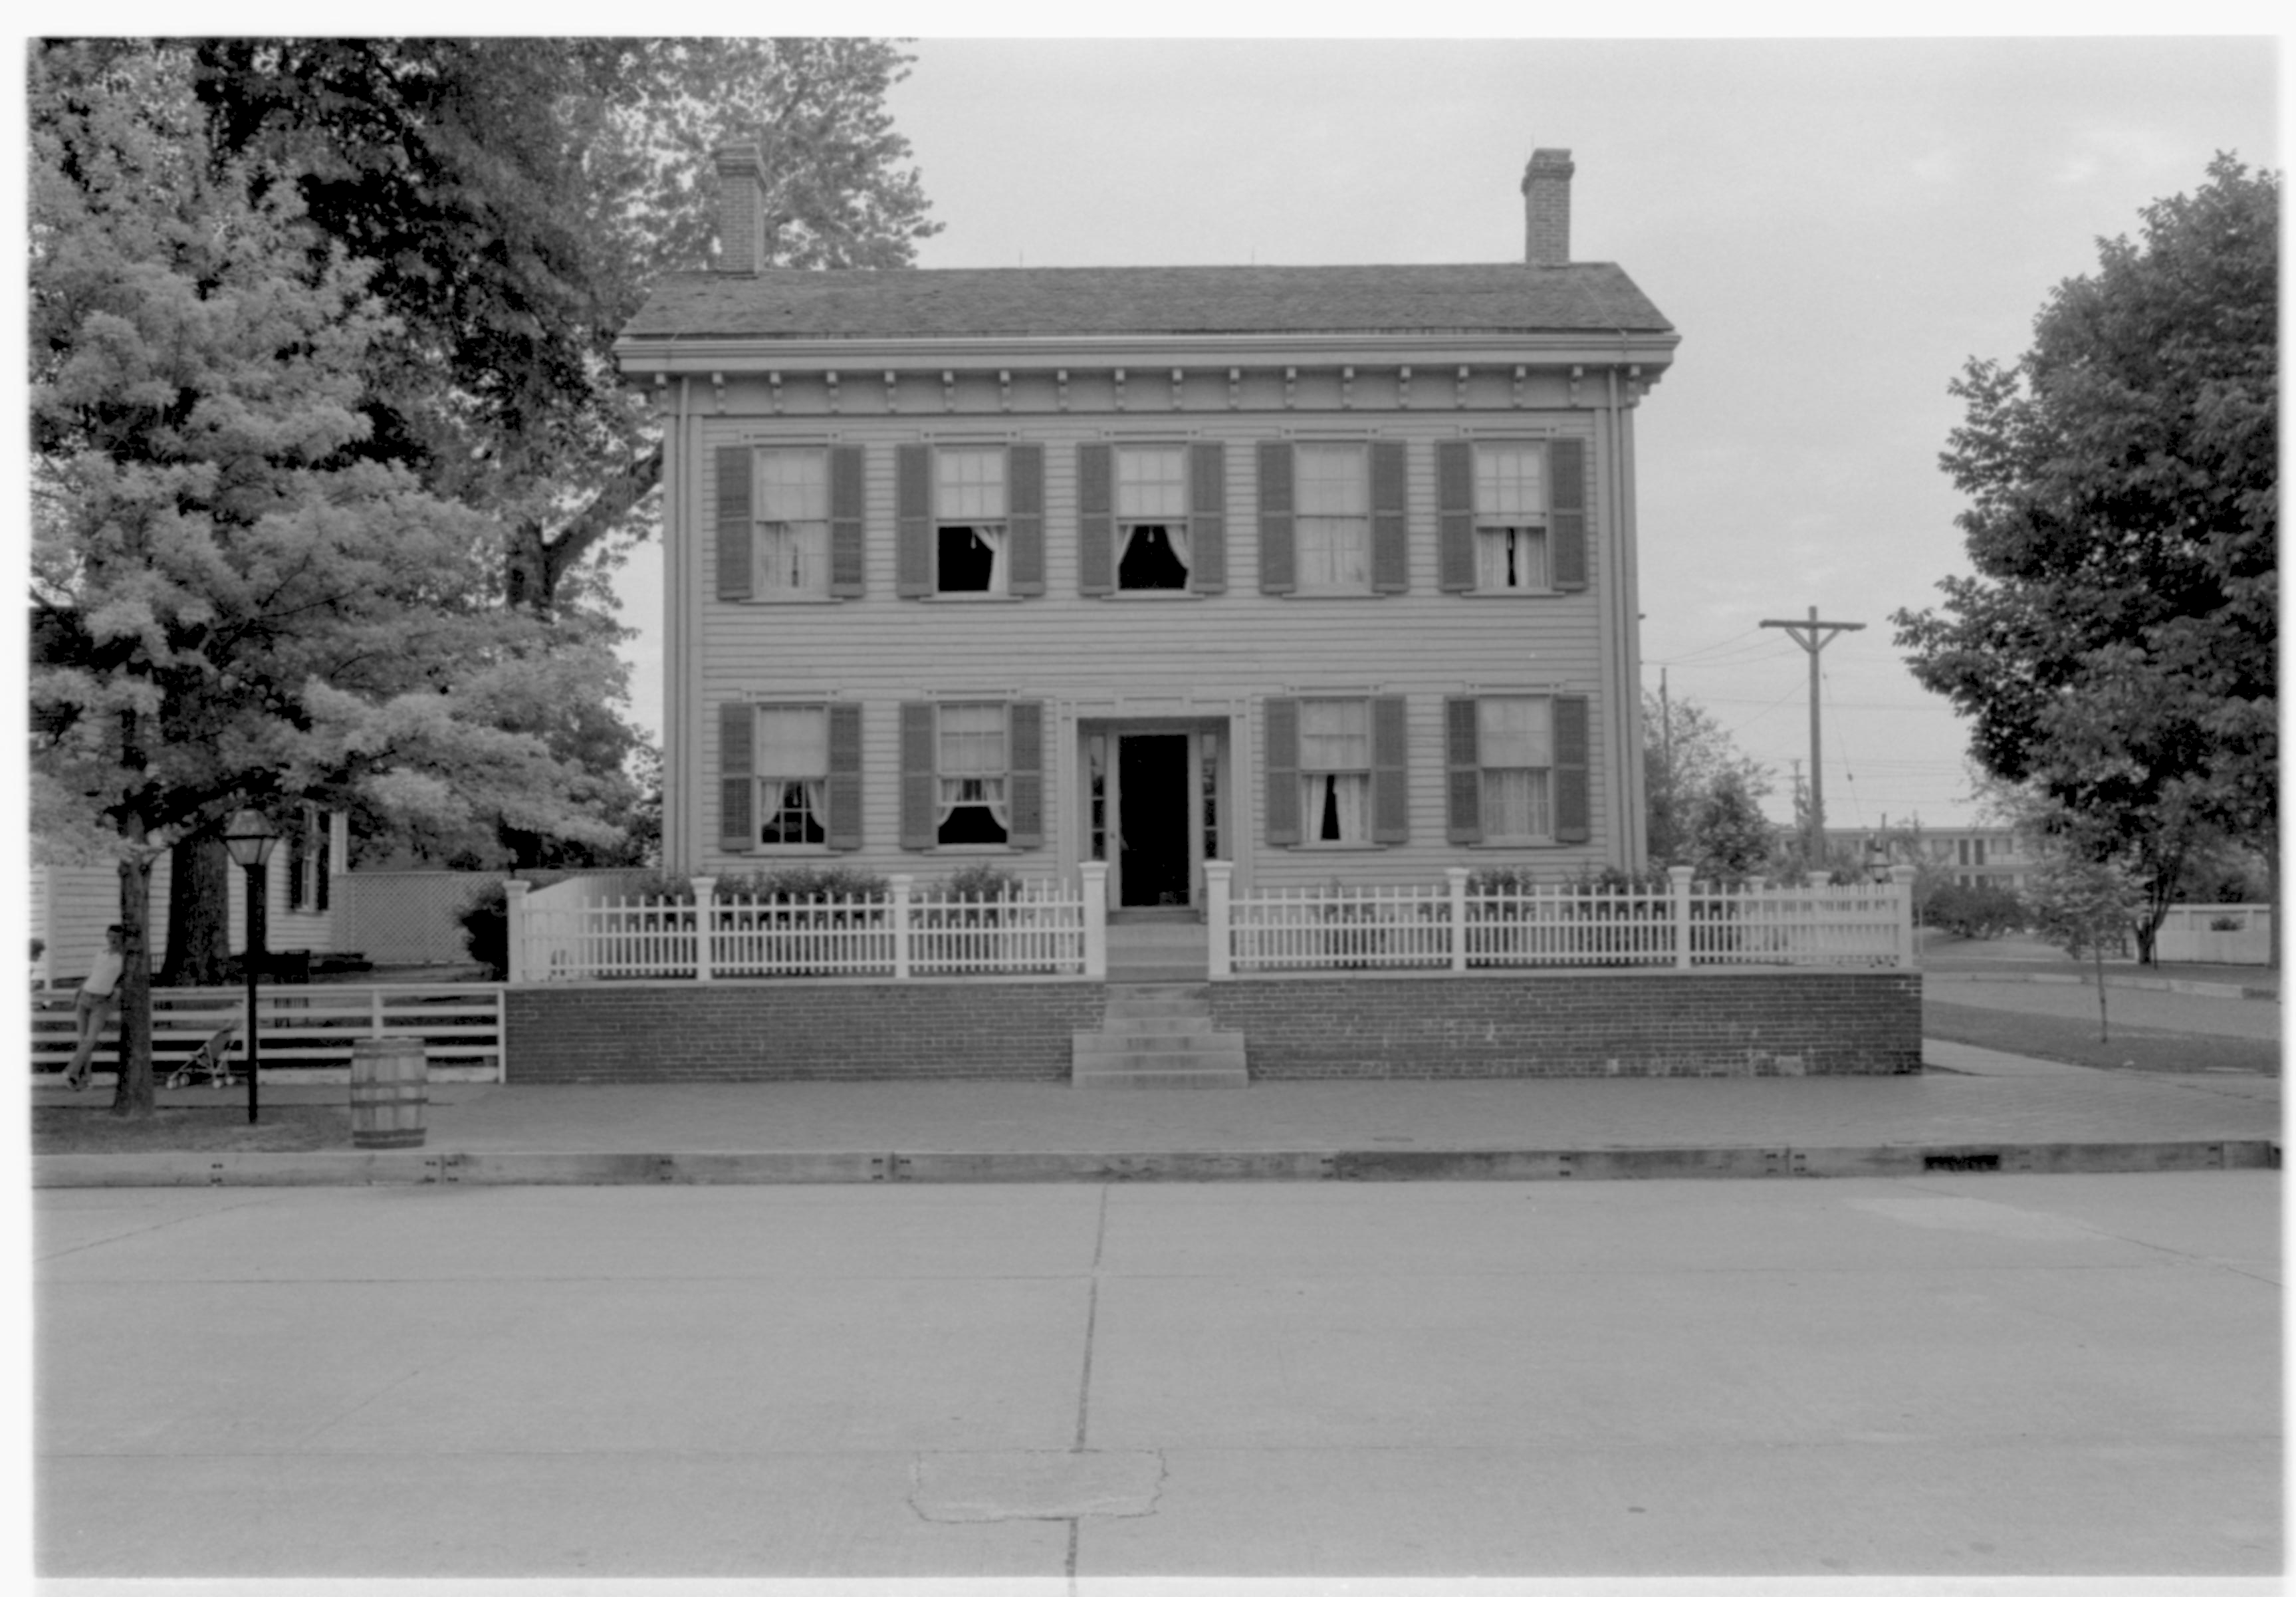 Lincoln Home front (West) elevation. Windows open on both floors. Visitors and a baby stroller visible on far left in front of Corneau House.  Electrical poles in background right. Travel Lodge Motel visible in far background right. Trash barrel on edge of brick plaza on left.  Looking East from West of 8th Street. Lincoln Home, 8th, Corneau, visitors, Travel Lodge Motel, electric poles